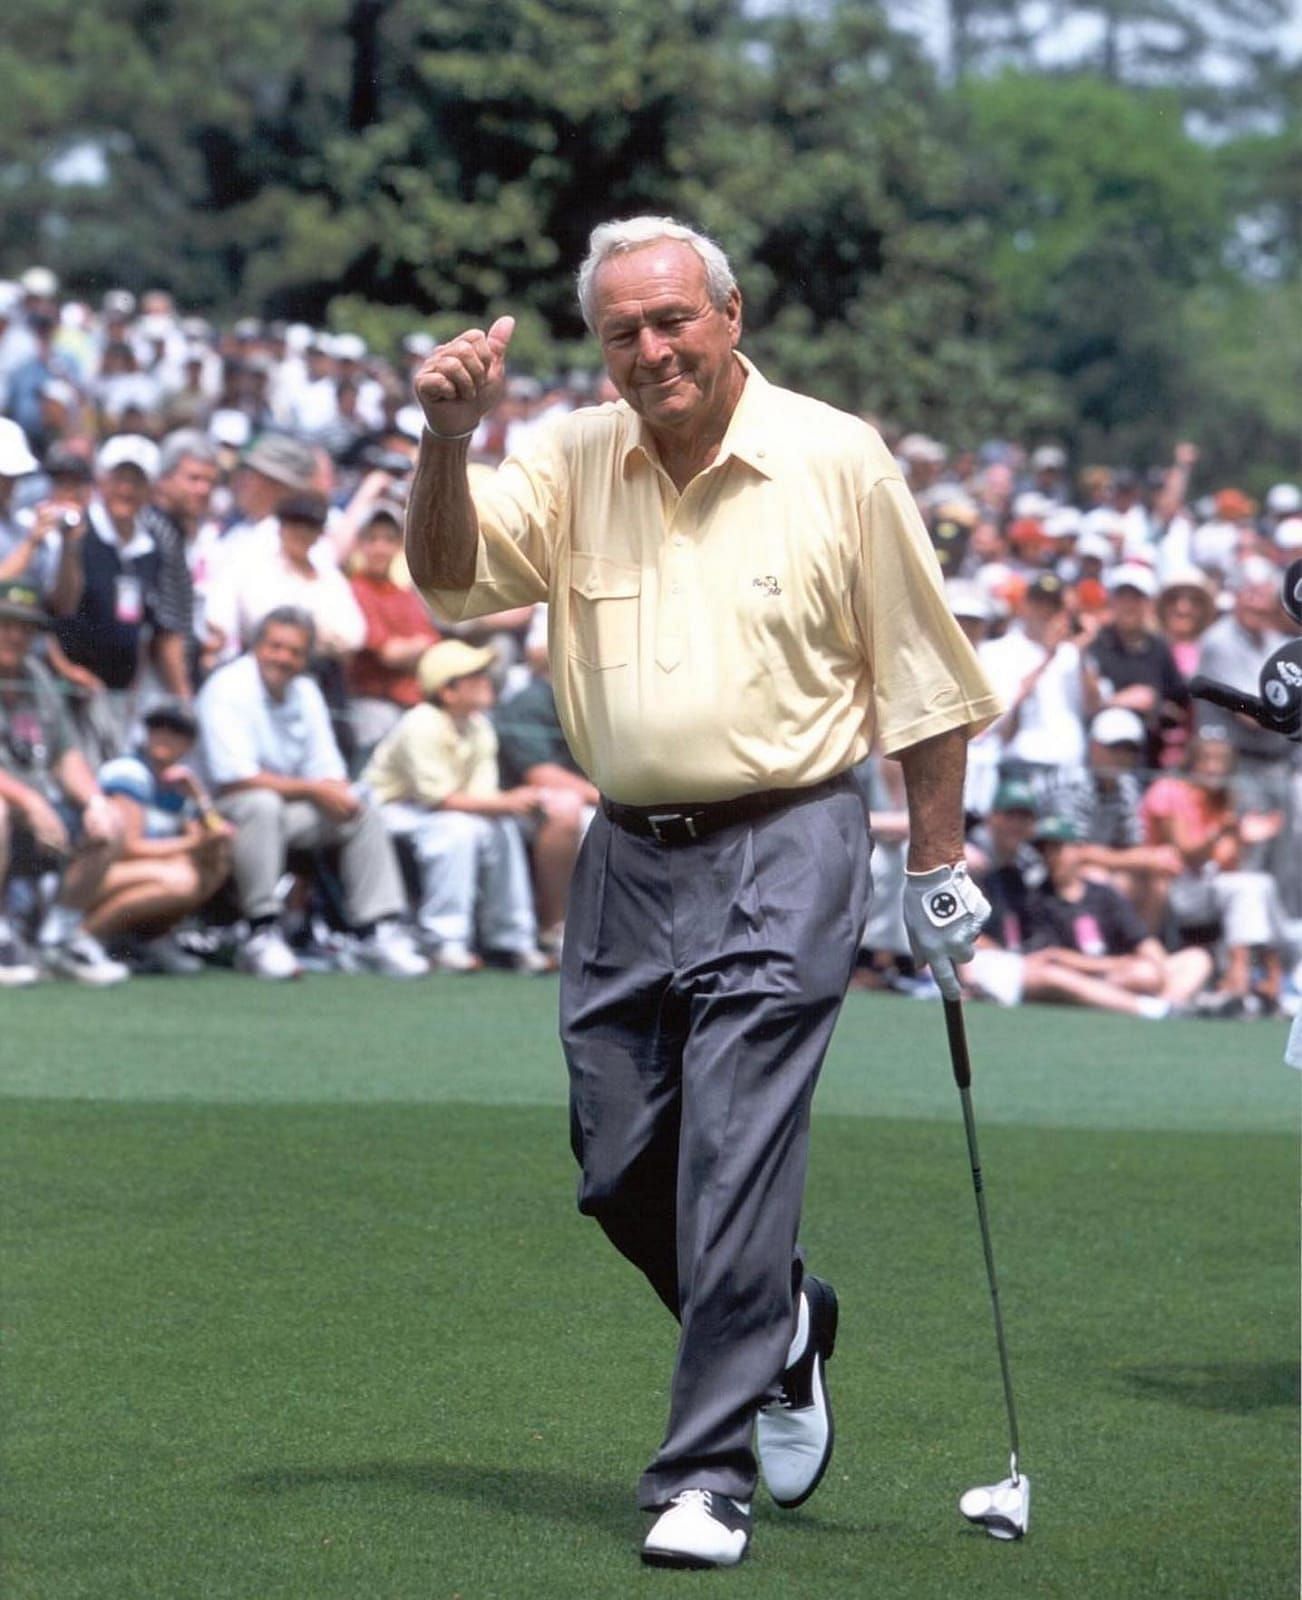 Arnold Palmers Net Worth, Salary, and Brand endorsements (Updated 2023)